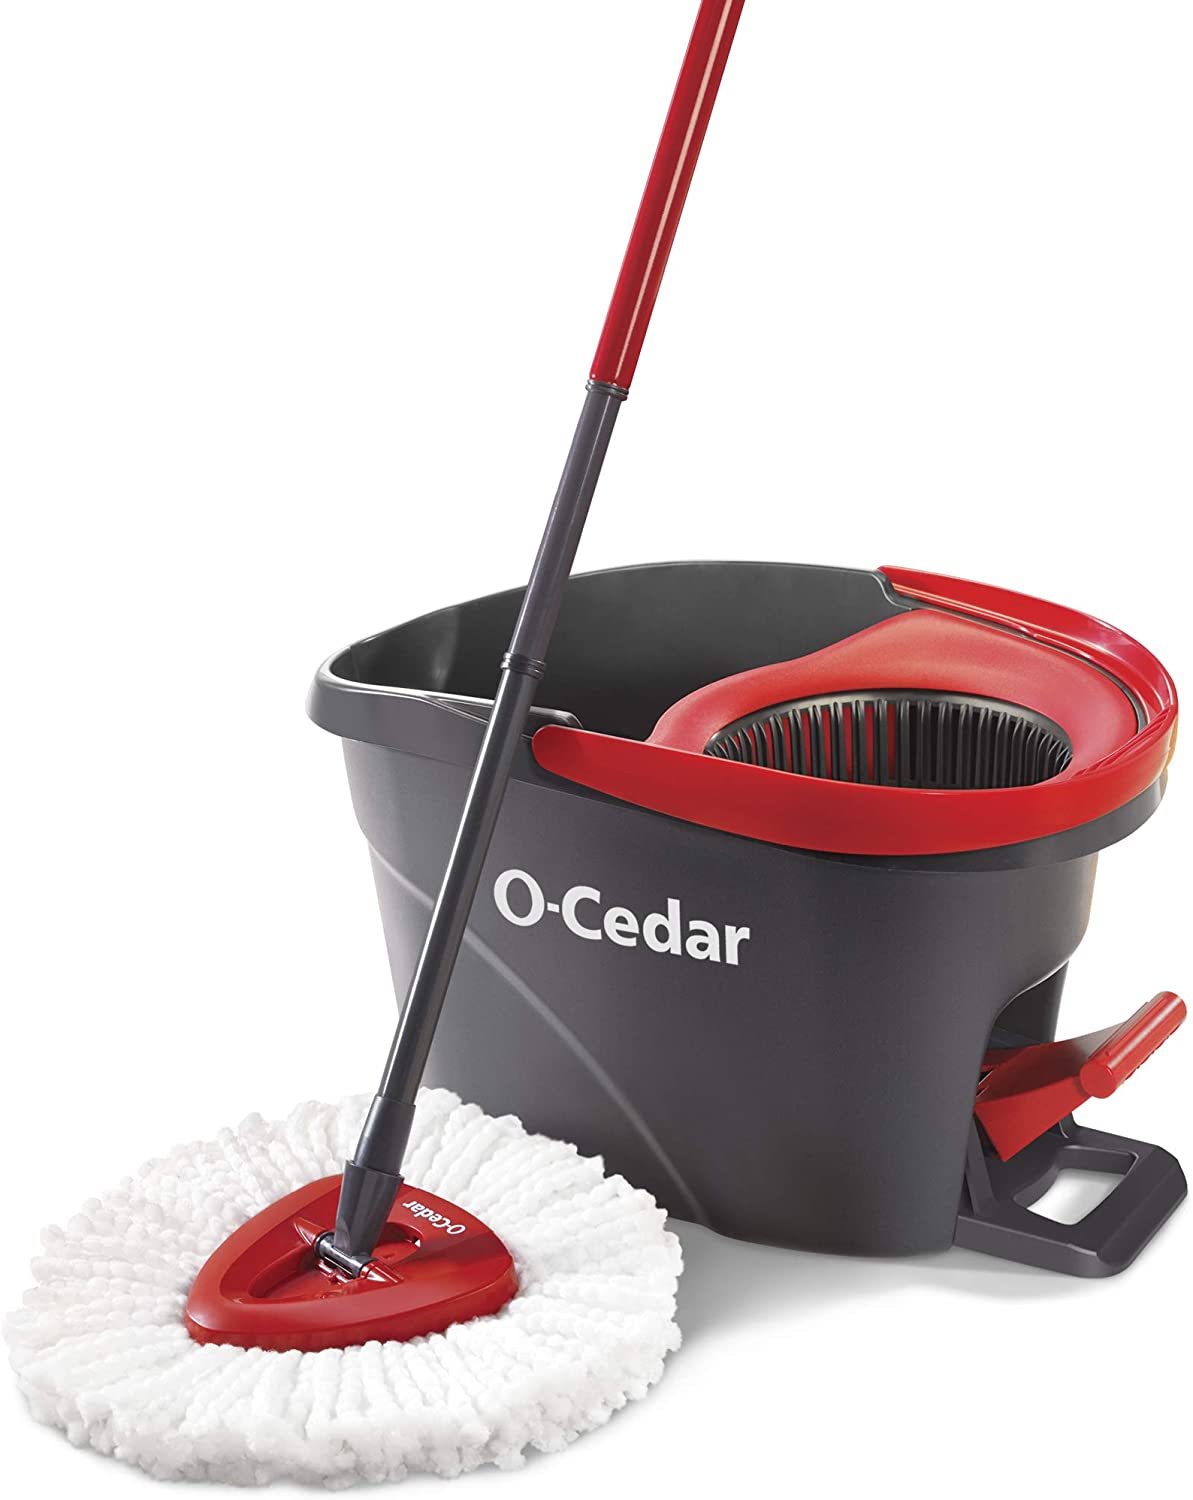 O-Cedar EasyWring Microfiber Spin Mop, Bucket Floor Cleaning System, Red, Gray 53